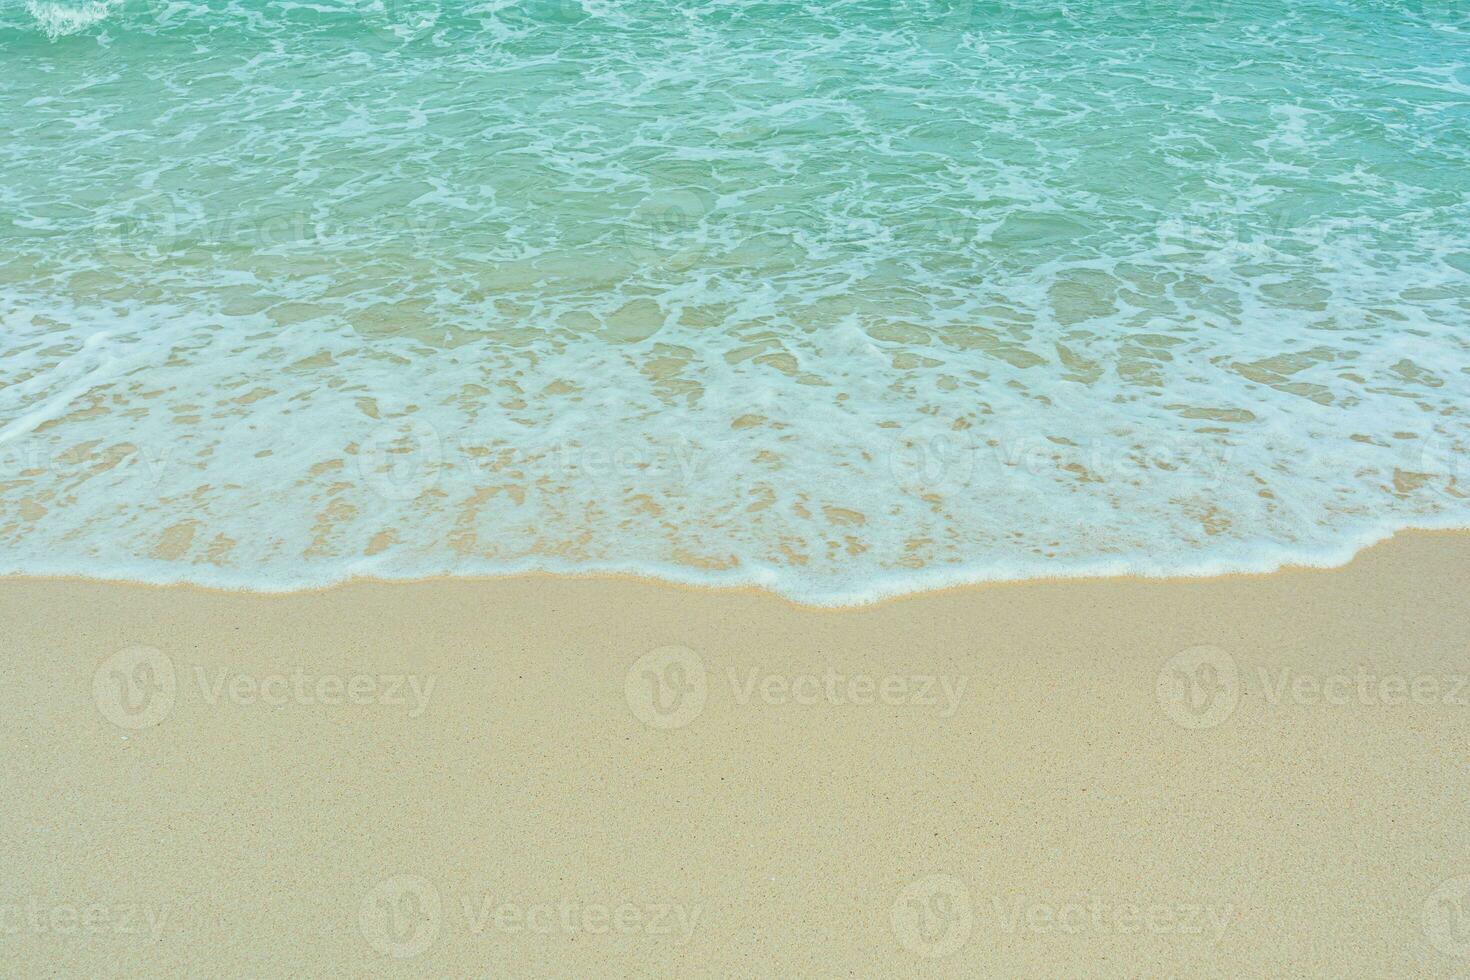 Soft wave of blue ocean on sandy beach. Summer vacation in island. clear azure water Background. photo